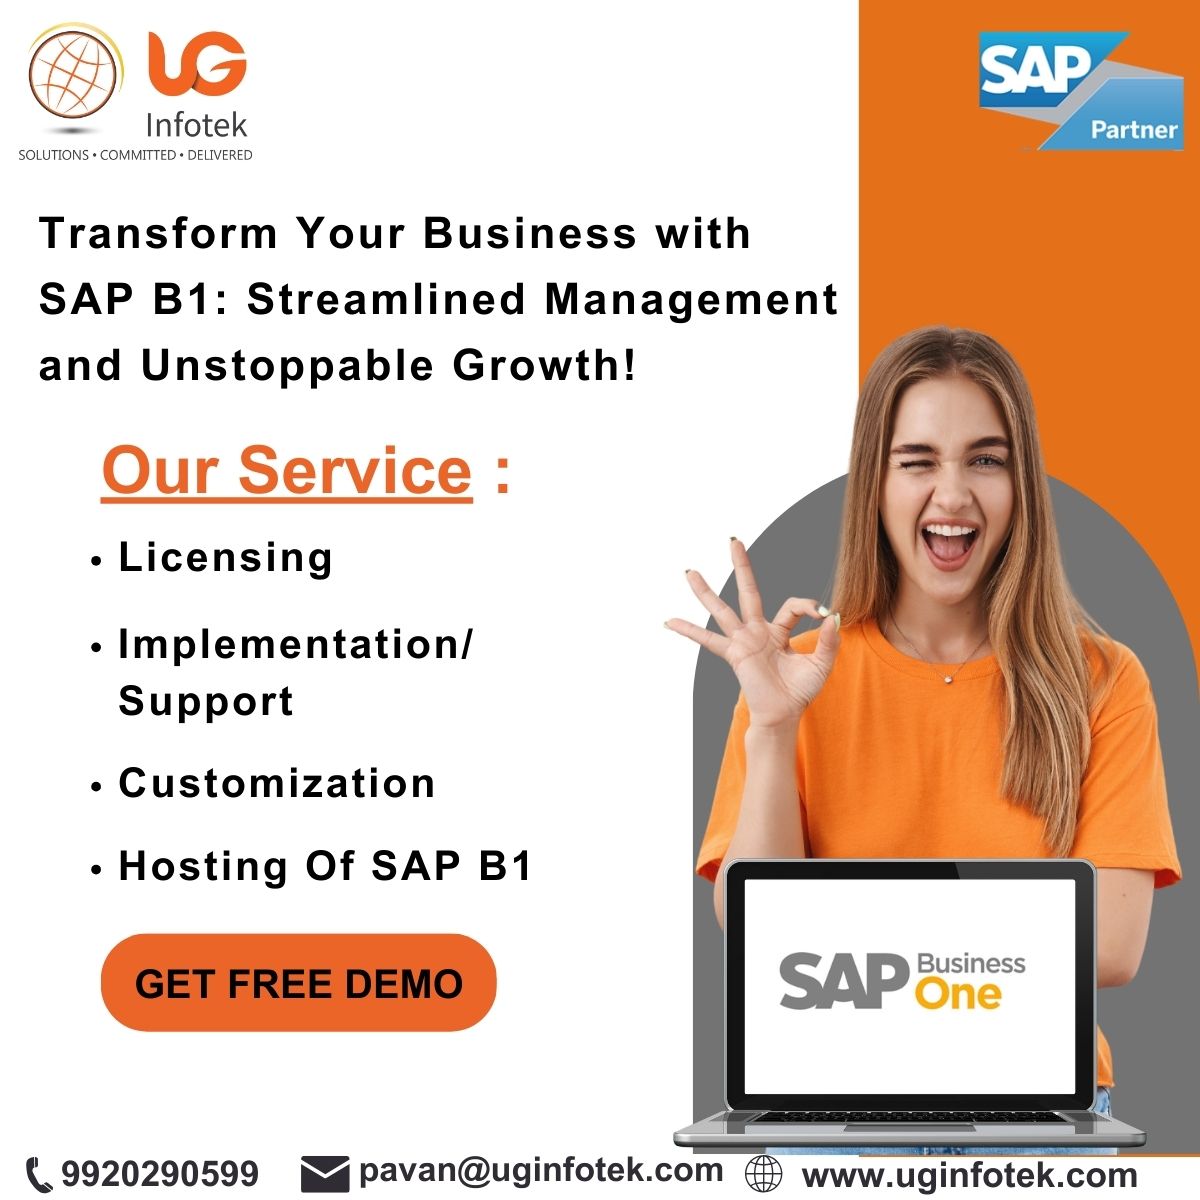 Upgrade Your Business with SAP B1 from UG Infotek LLP: Affordable and Tailored ERP Solutions for Every Need! #sapbusinessone #inventorymanagement #affordableprice #uginfotekllp #sapb1 #erpsolutions #b2b #supportsmallbusiness #thanecity #maharashtra #pune #sapbusinessonepartner